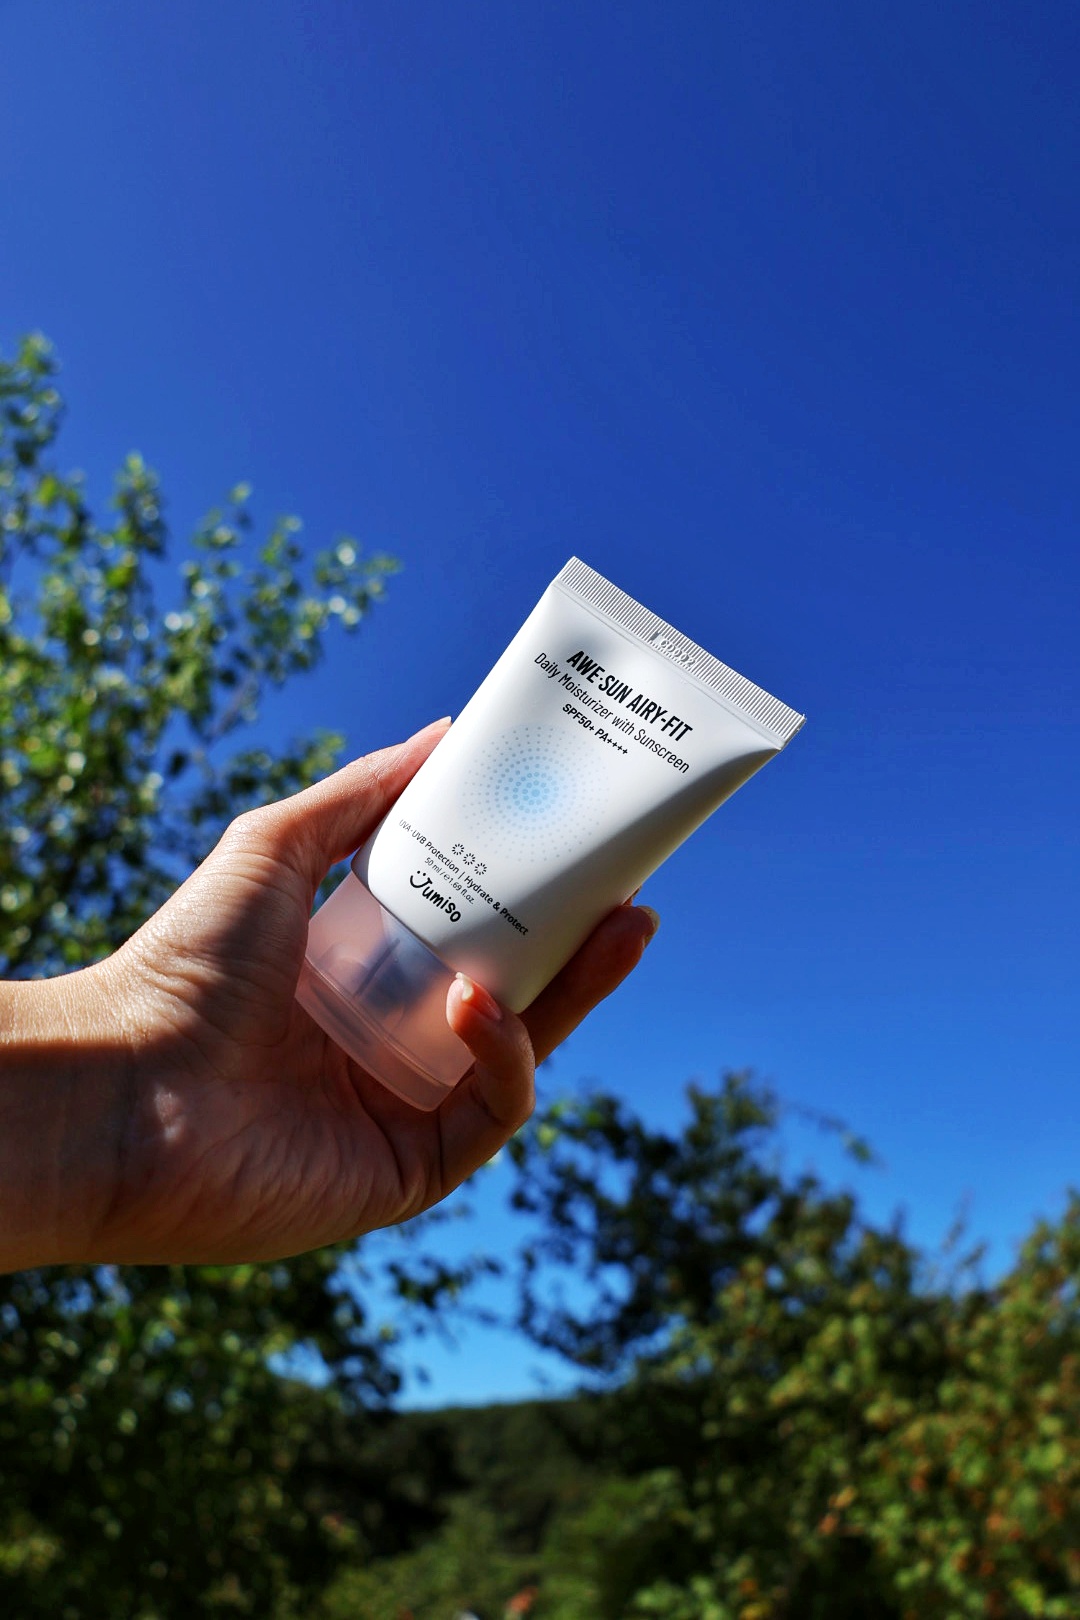 JUMISO Awe-Sun Airy-Fit Sunscreen Review